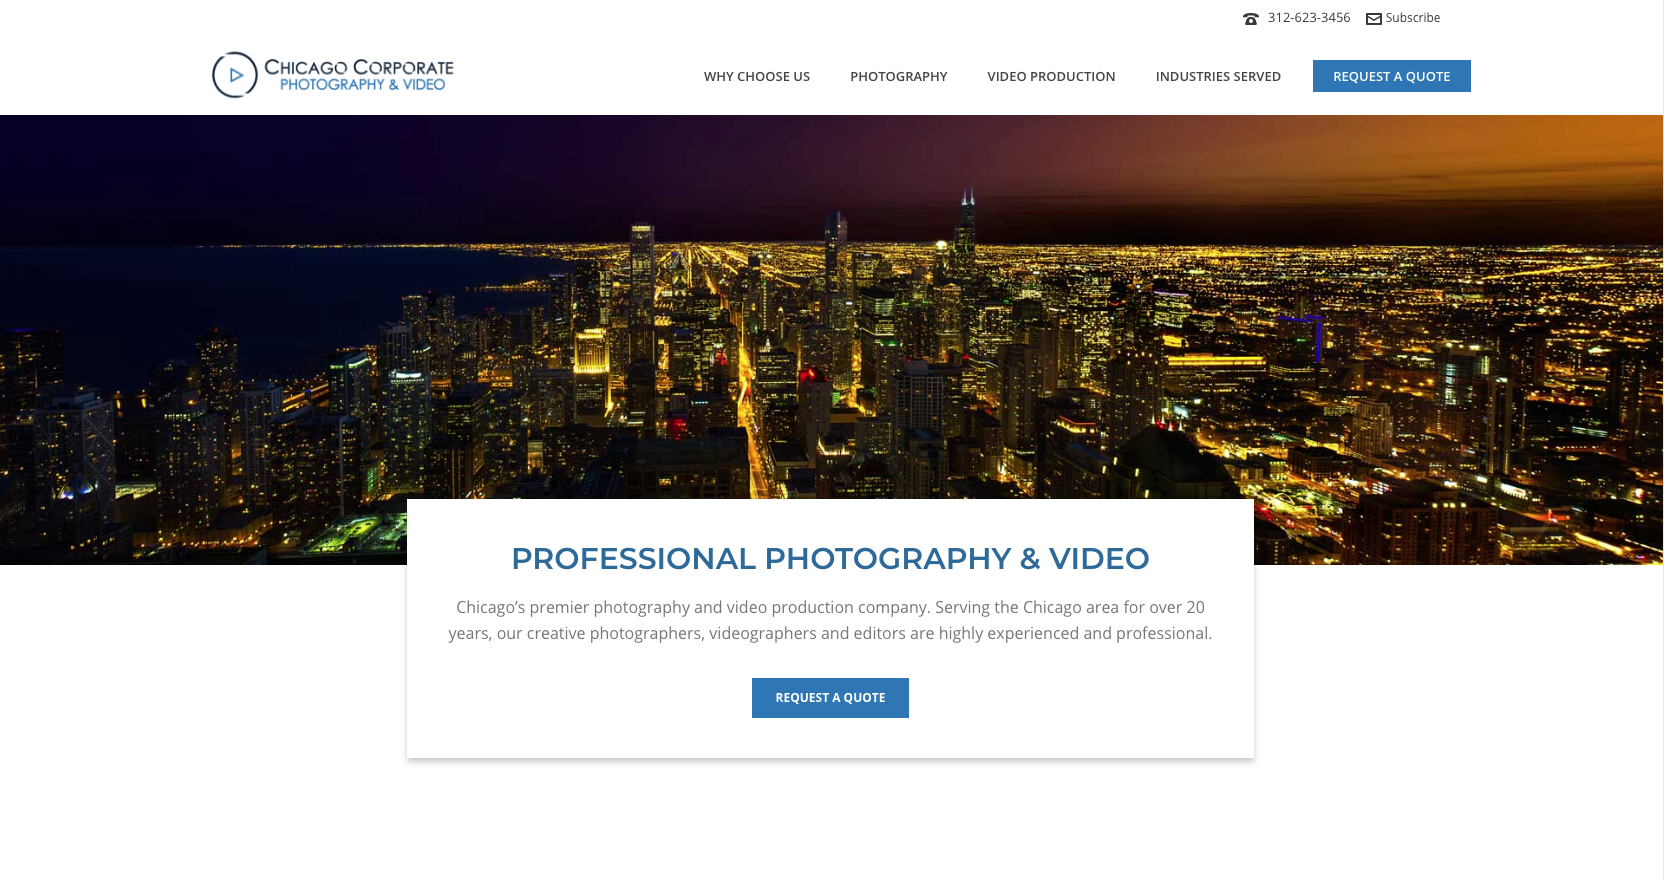 Chicago Corporate Photography and Video Website